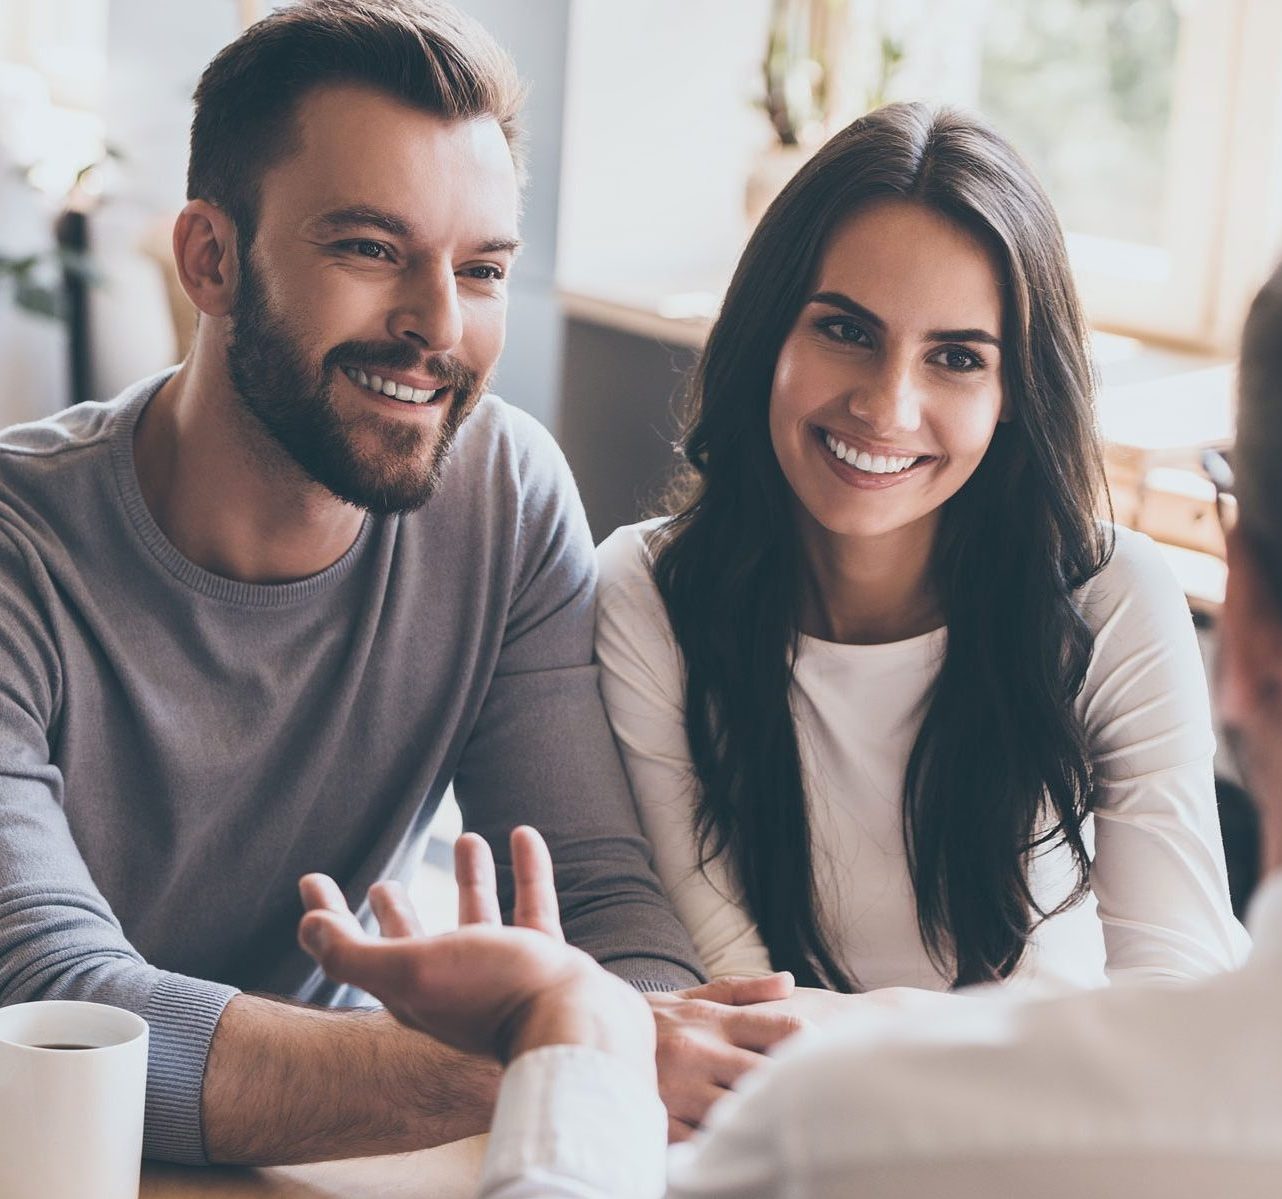 Whether it’s purchasing your first home, refinancing, or purchasing an investment property, the Manson Financial Services team will look after your needs.